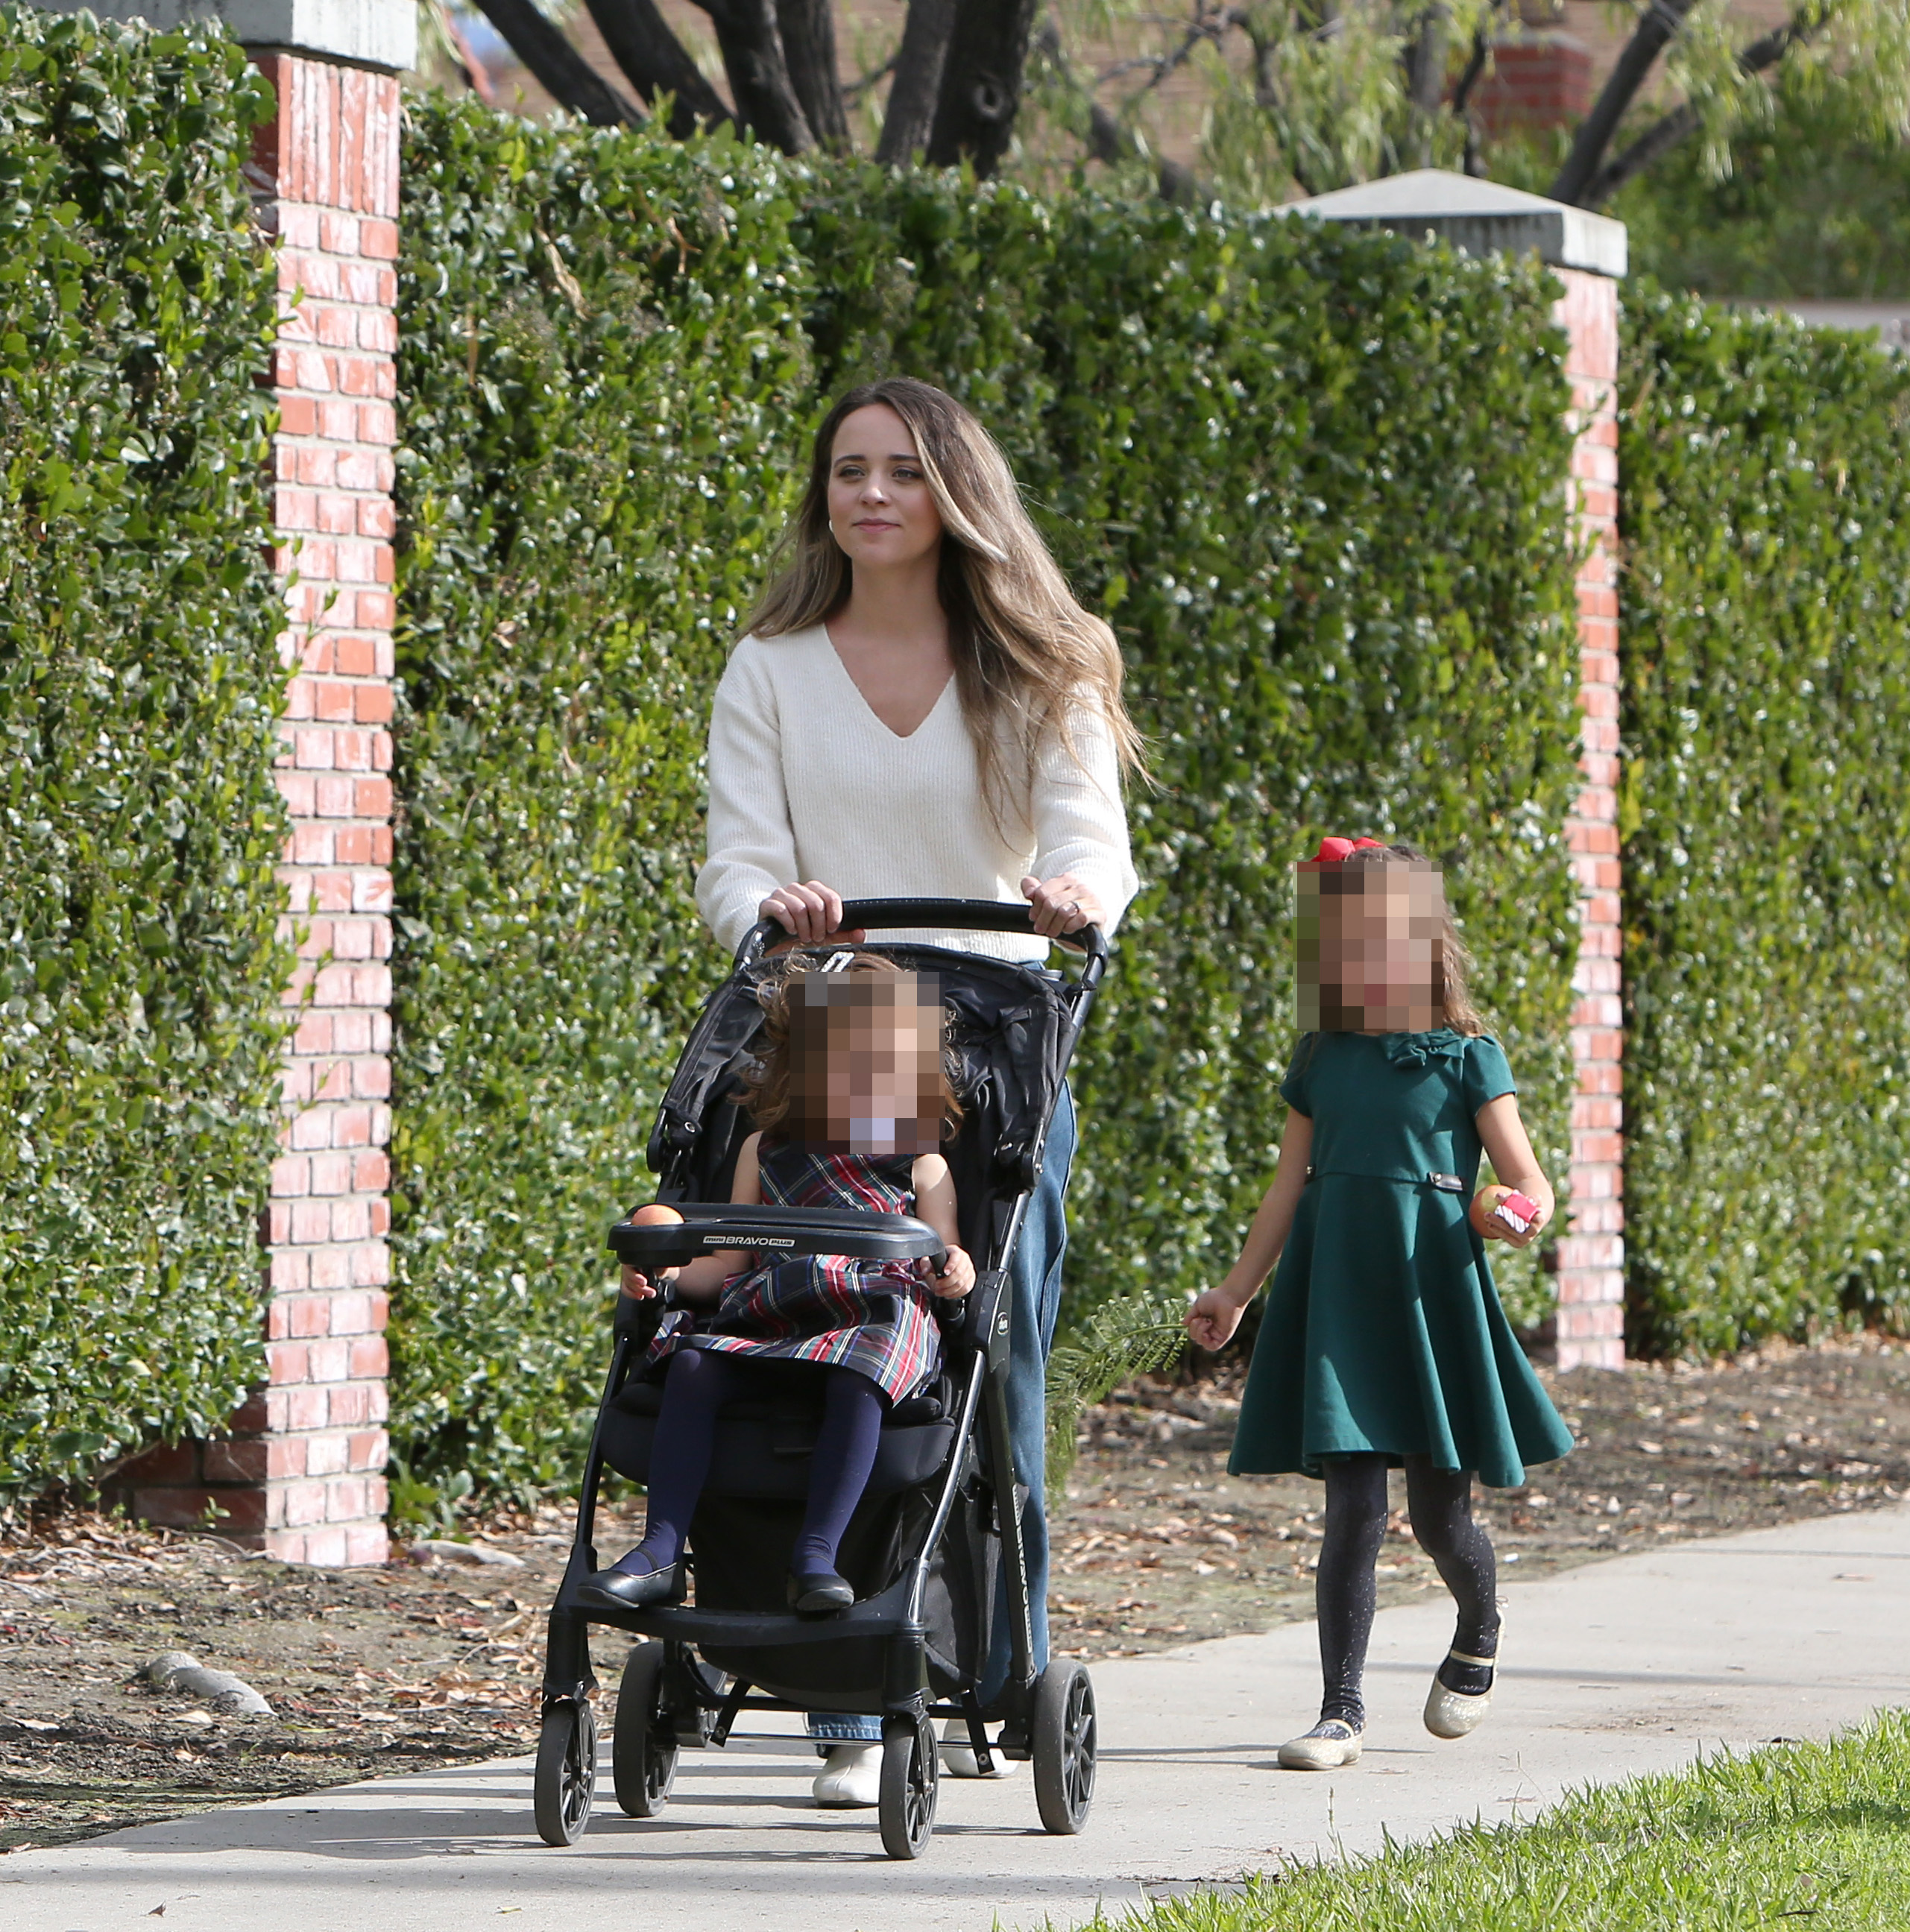 Jinger, Felicity, and Evangeline were headed to church on Sunday morning in Los Angeles, California